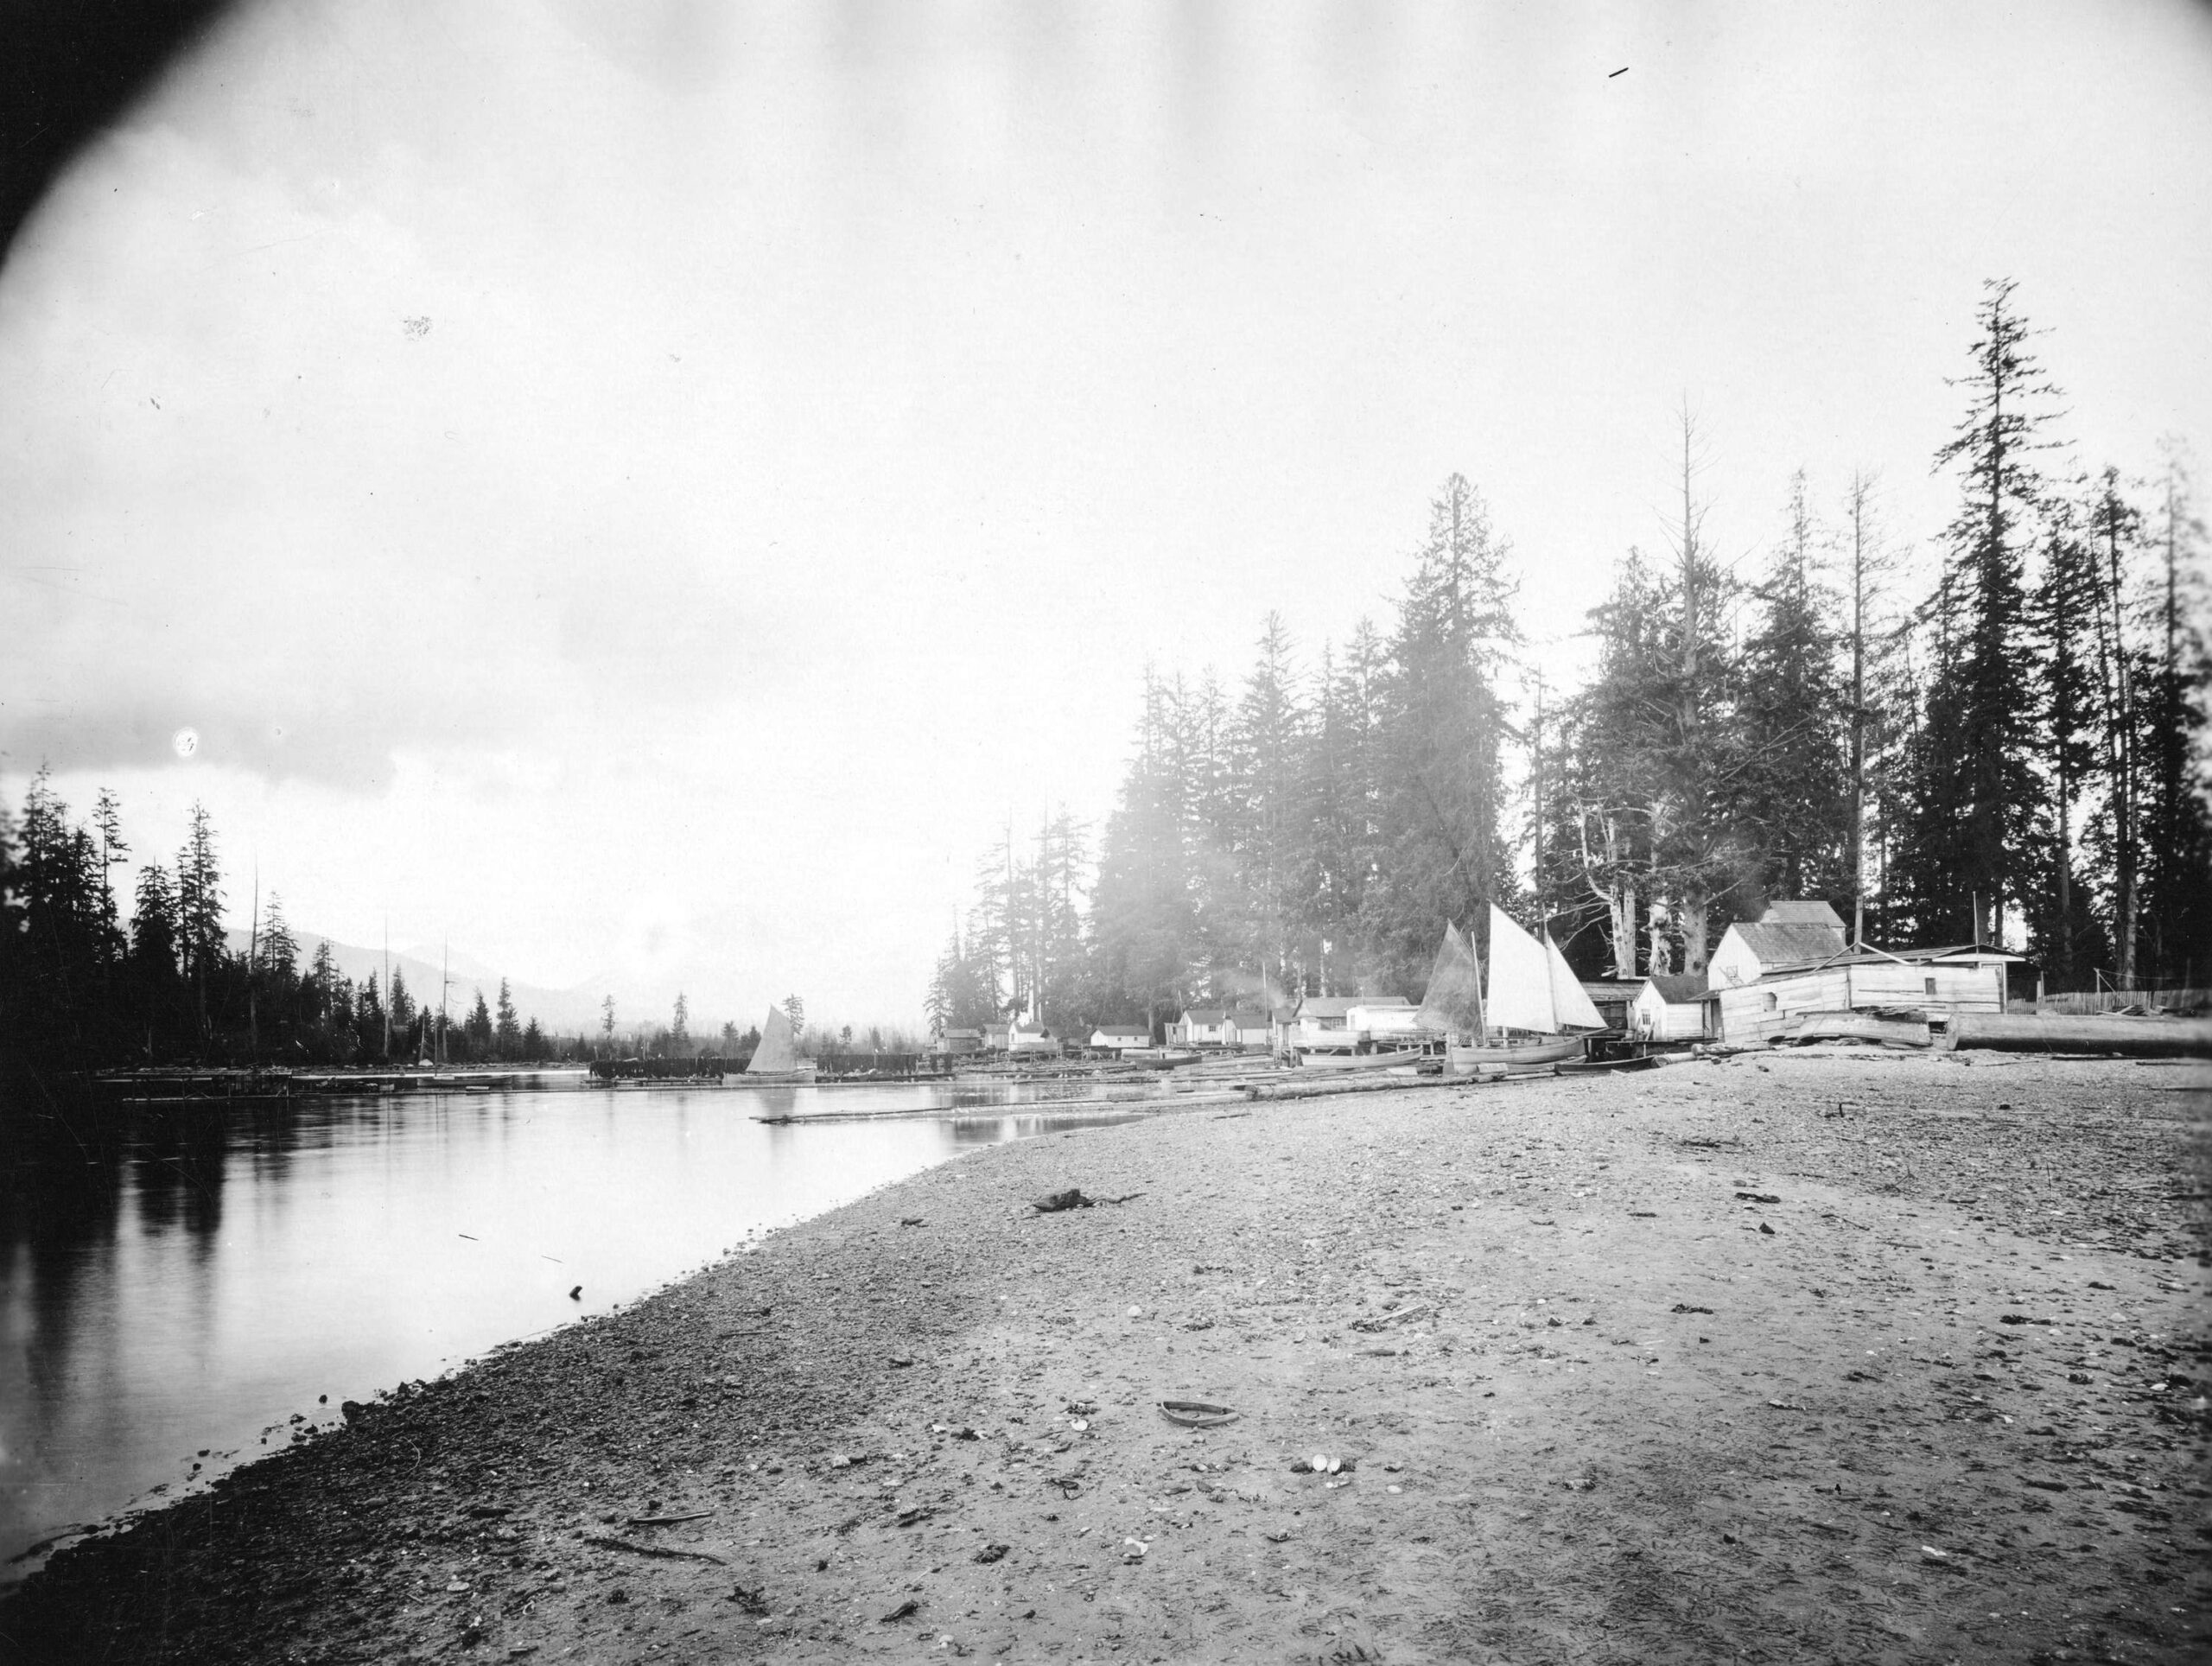 Squatters and boats on Deadman's Island 1895